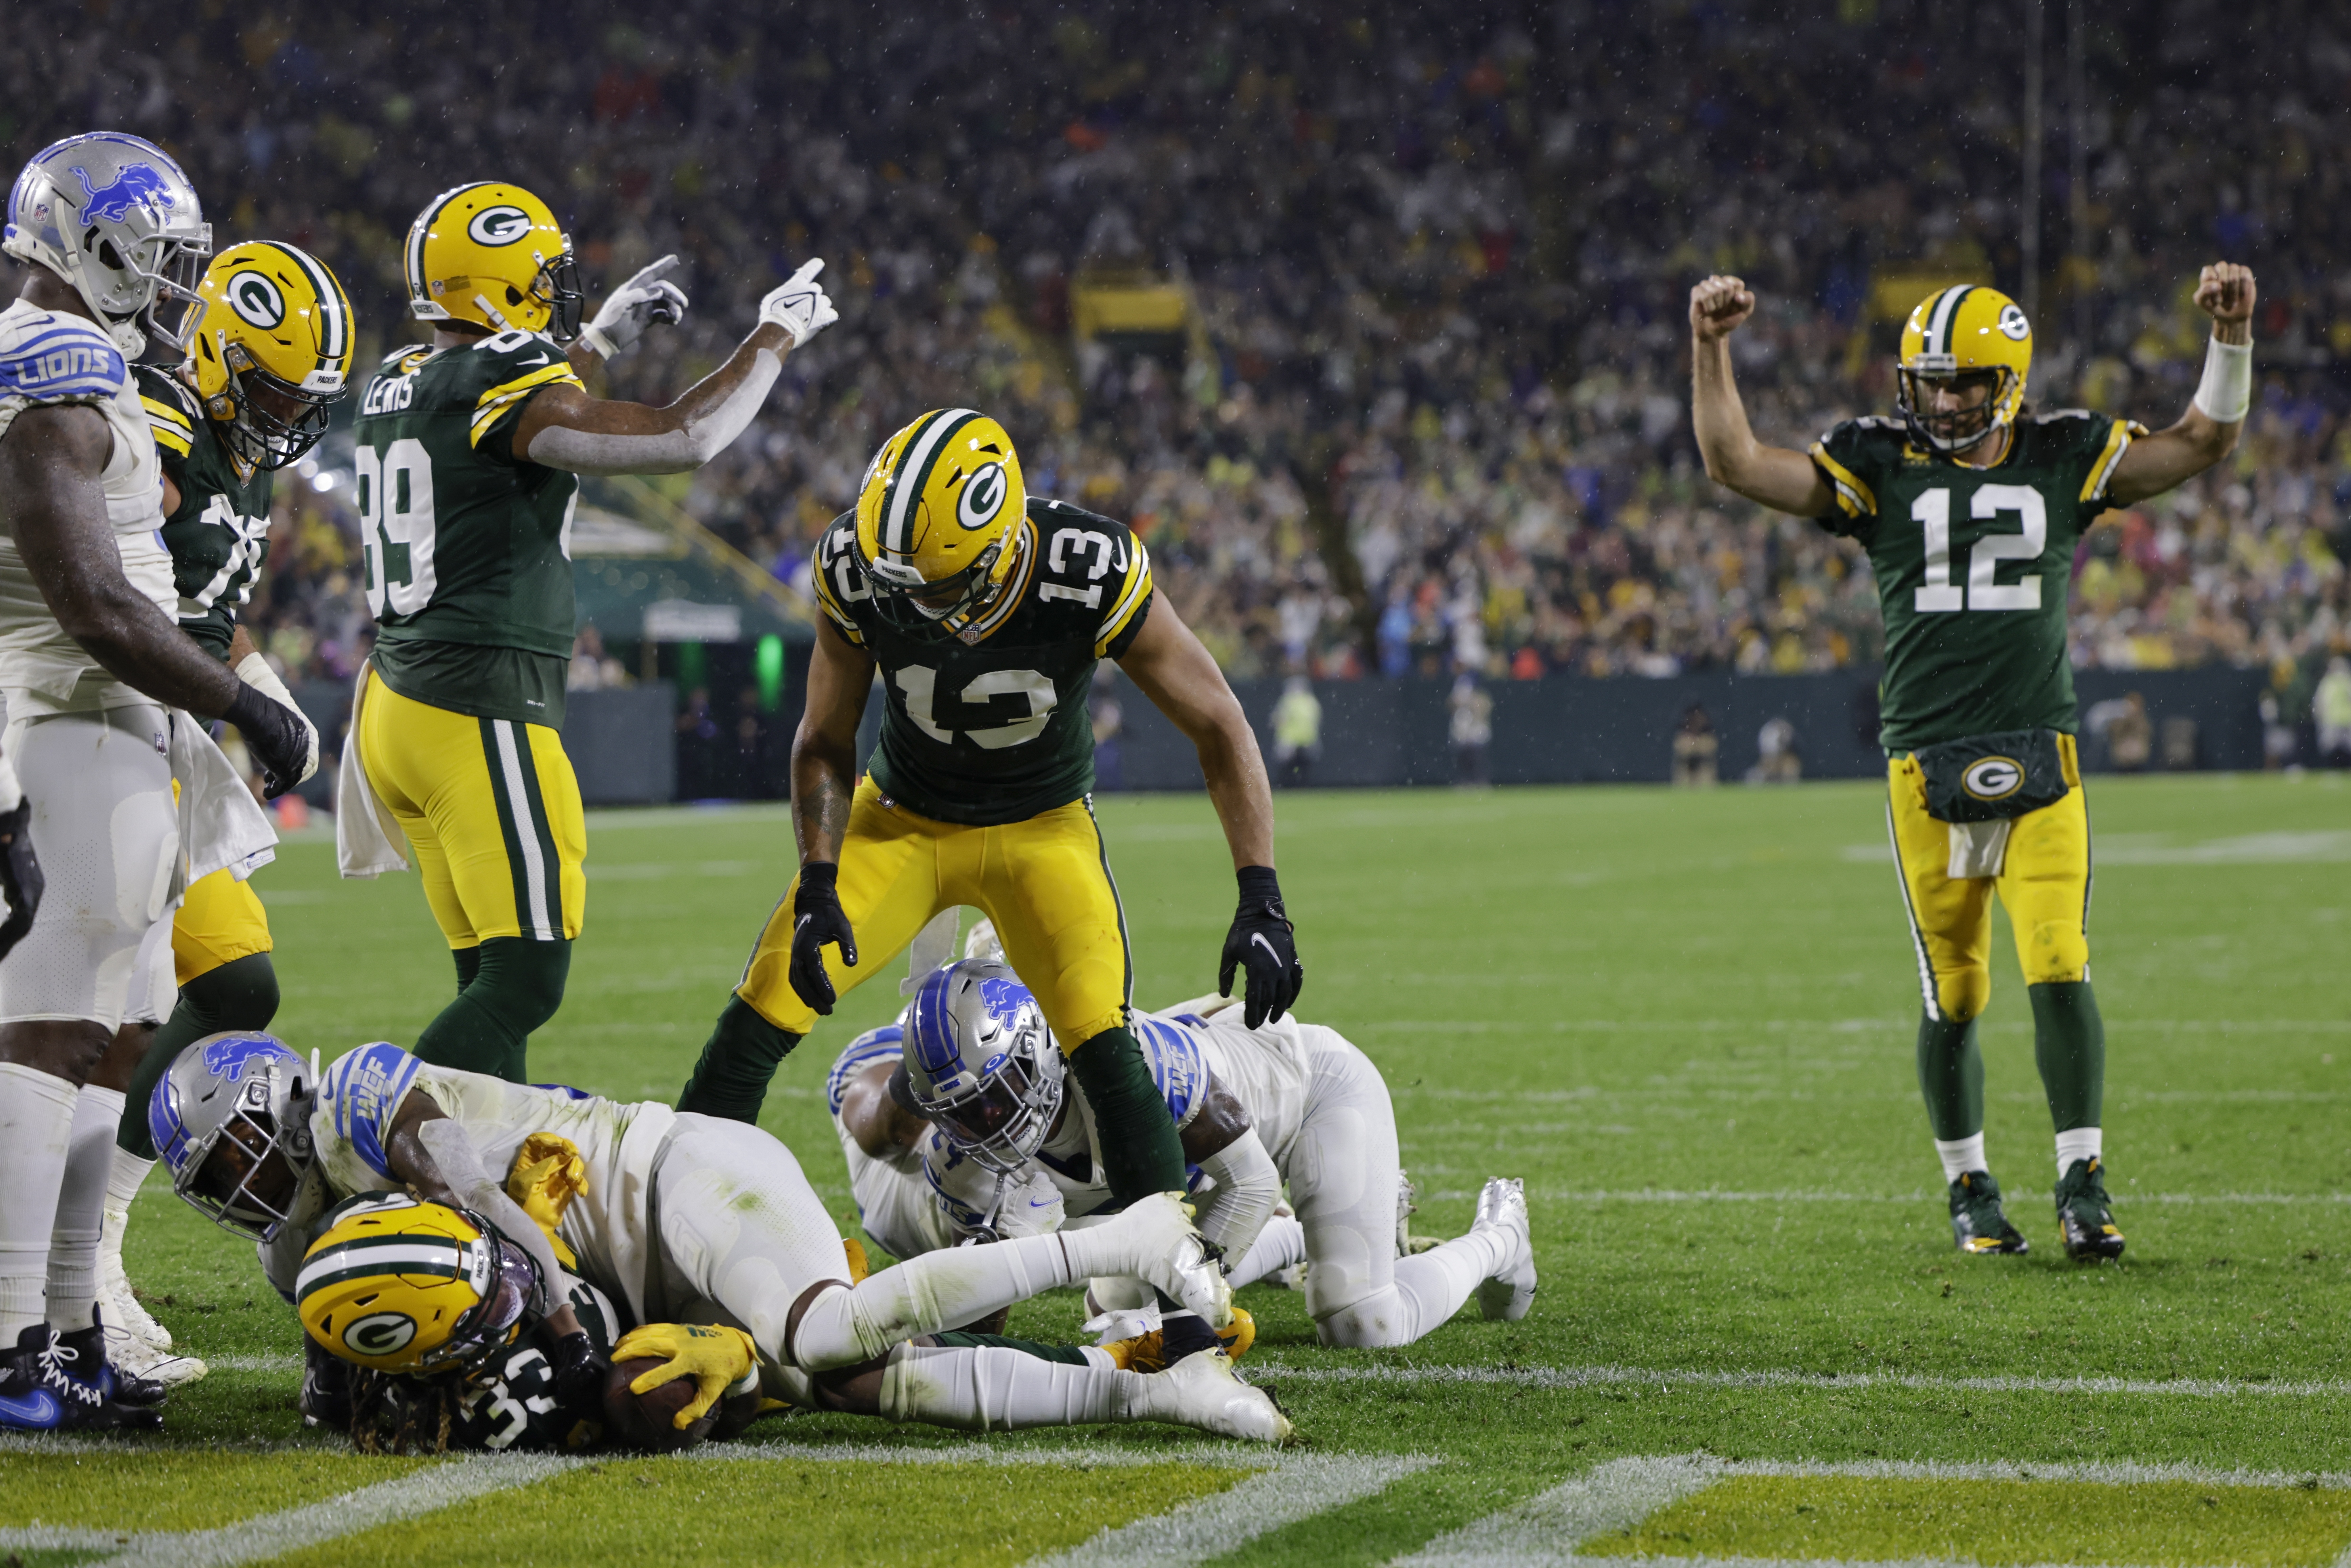 NFL playoffs: Seahawks are in field after Lions stun Packers